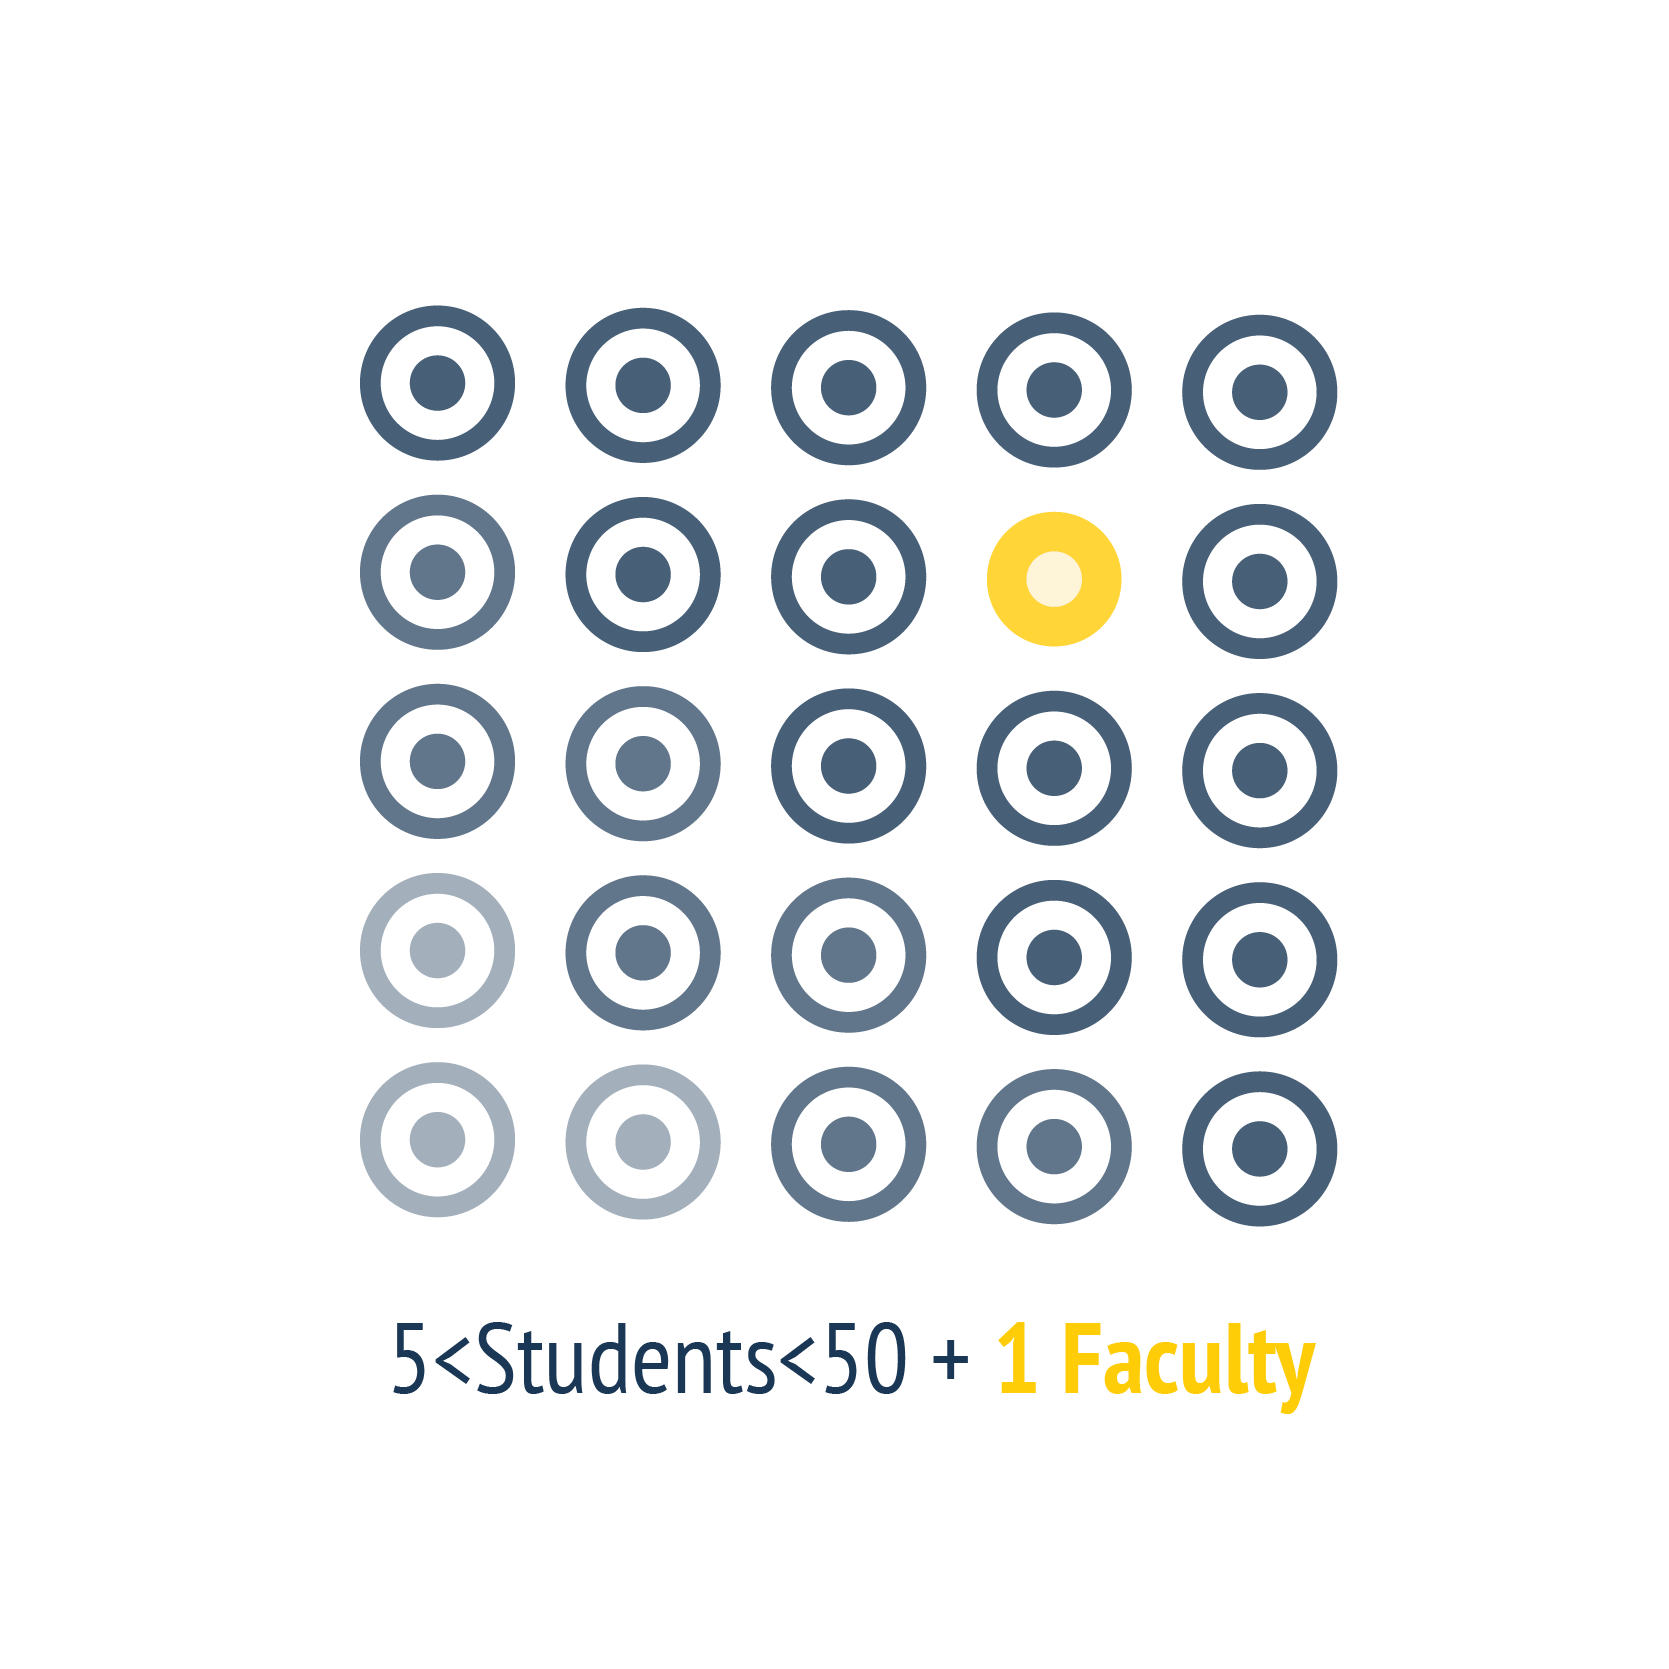 Grid of 25 navy circles with one yellow circle in the second row. Caption says between 5 and 50 students plus 1 faculty.